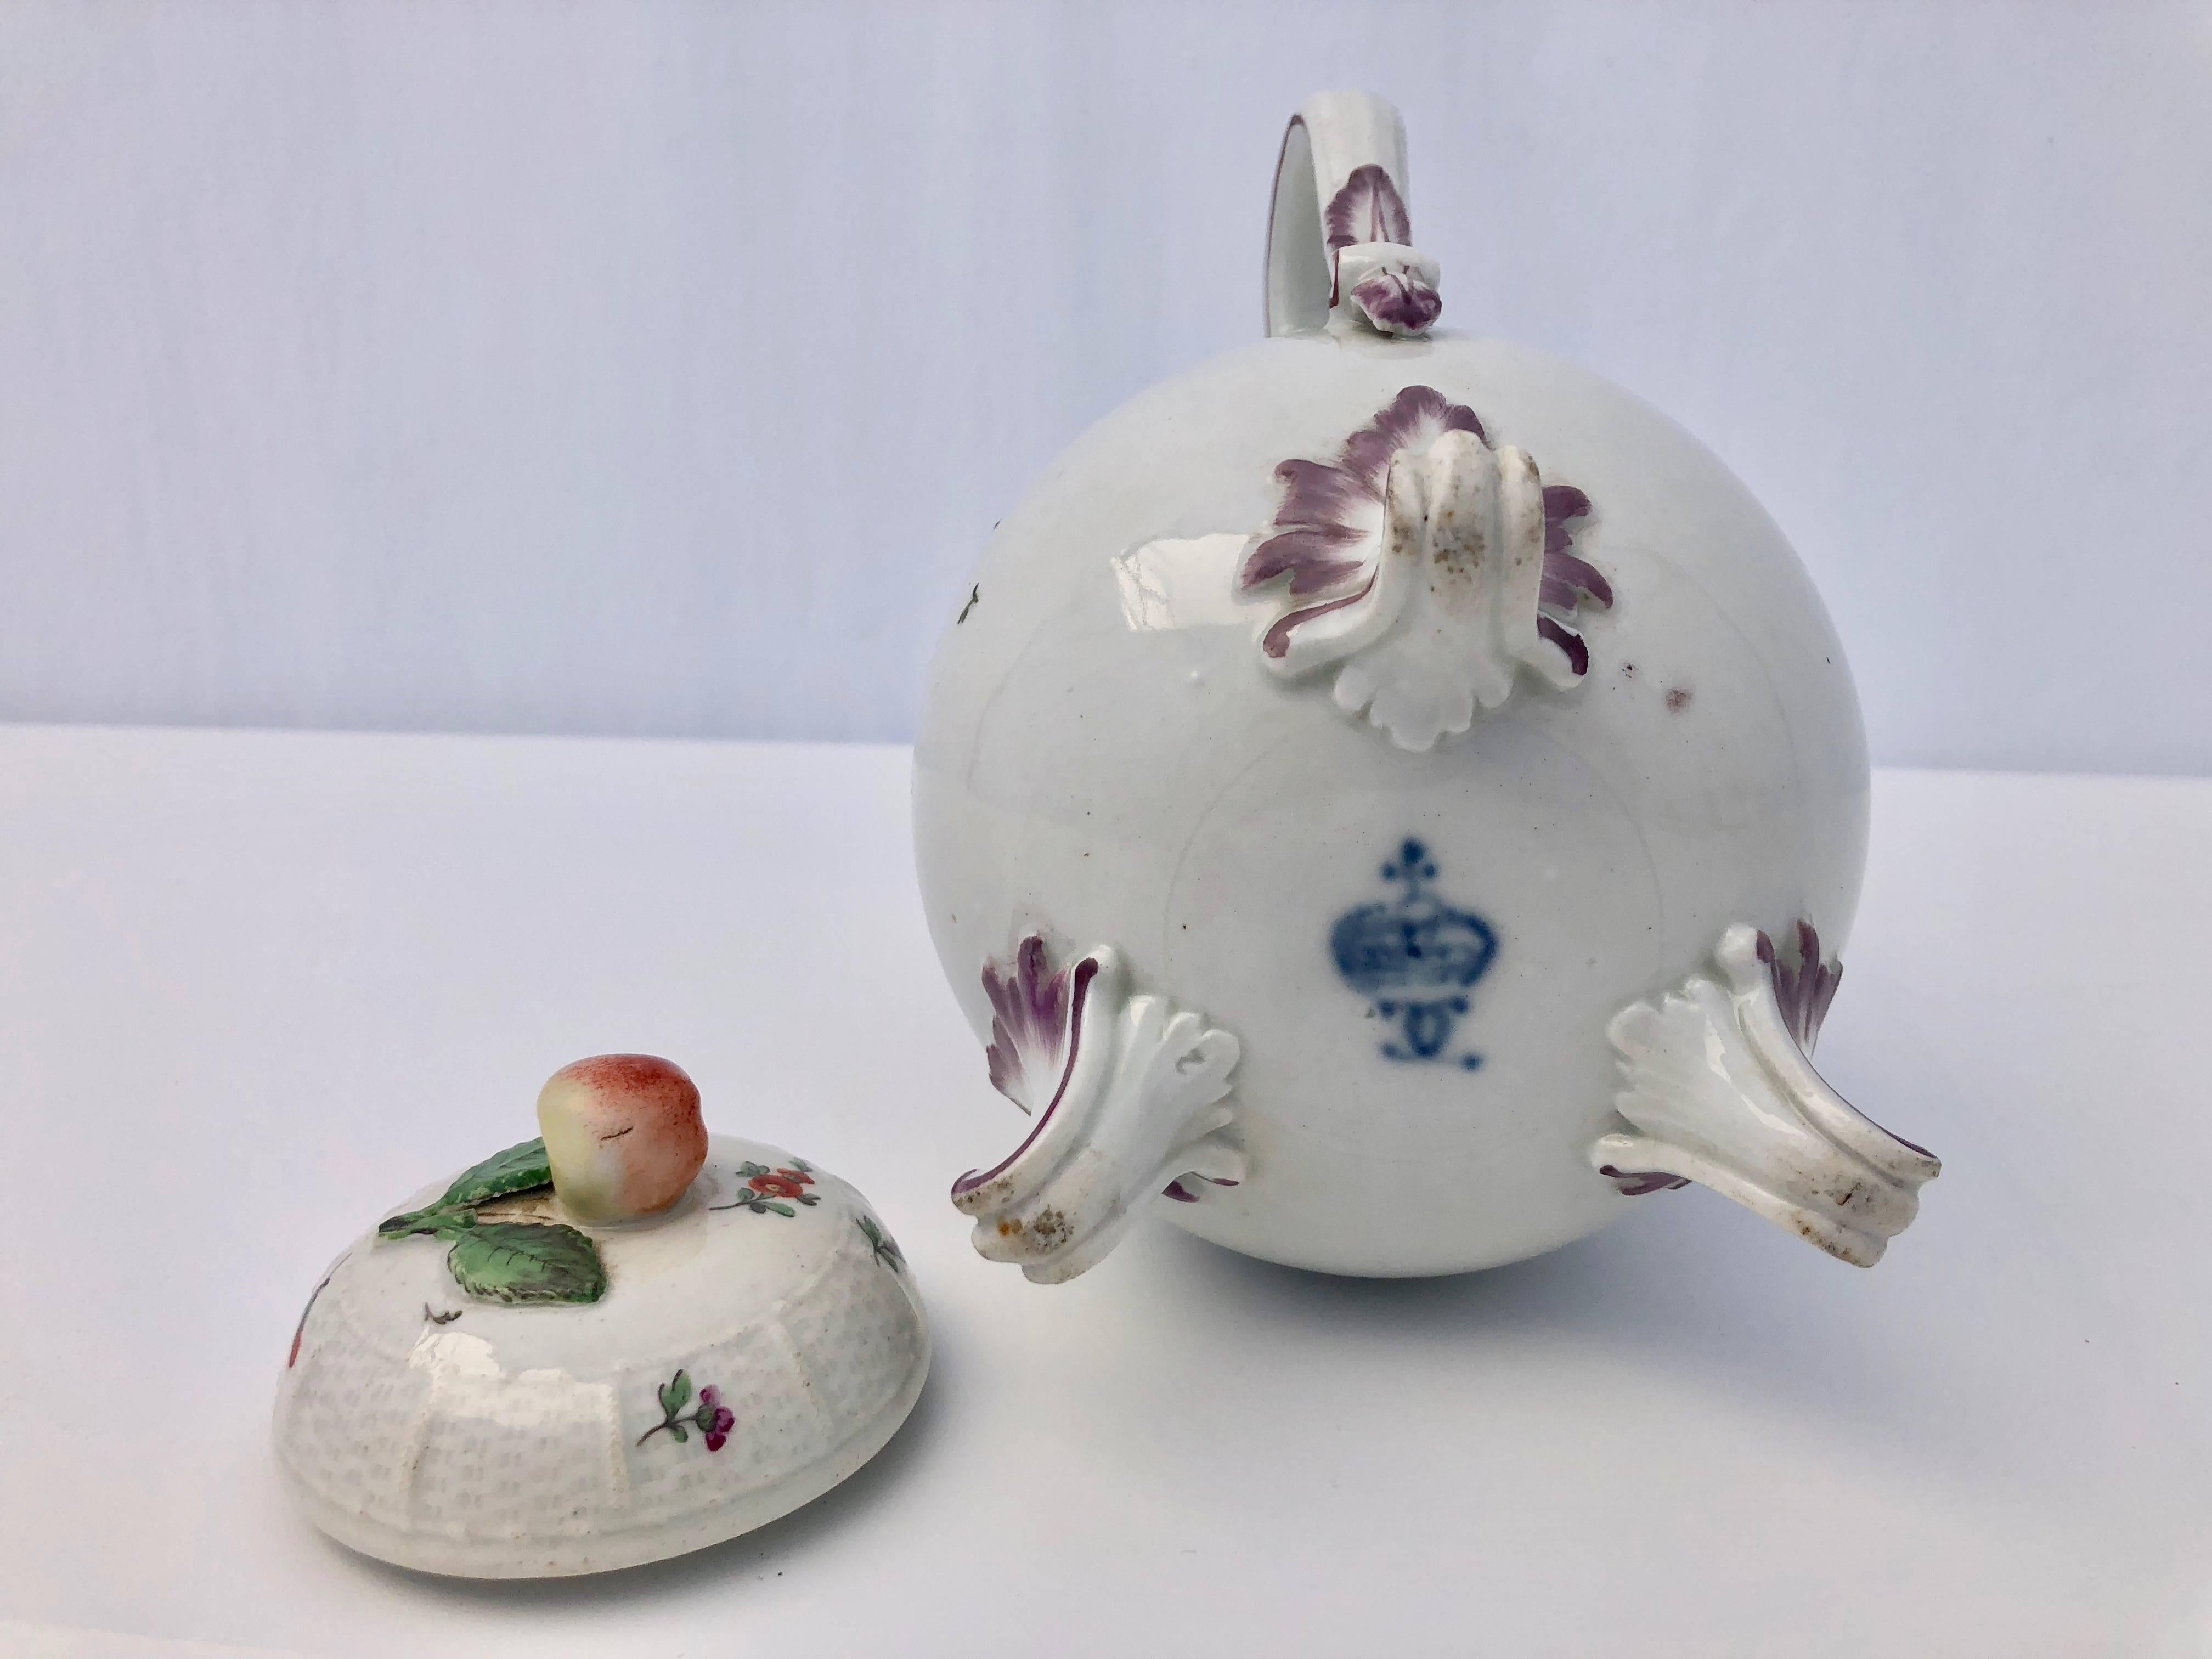 18th Century German Louisbourg Faïence Tea Pot with Flower motif and Apple on the Top, 1800s